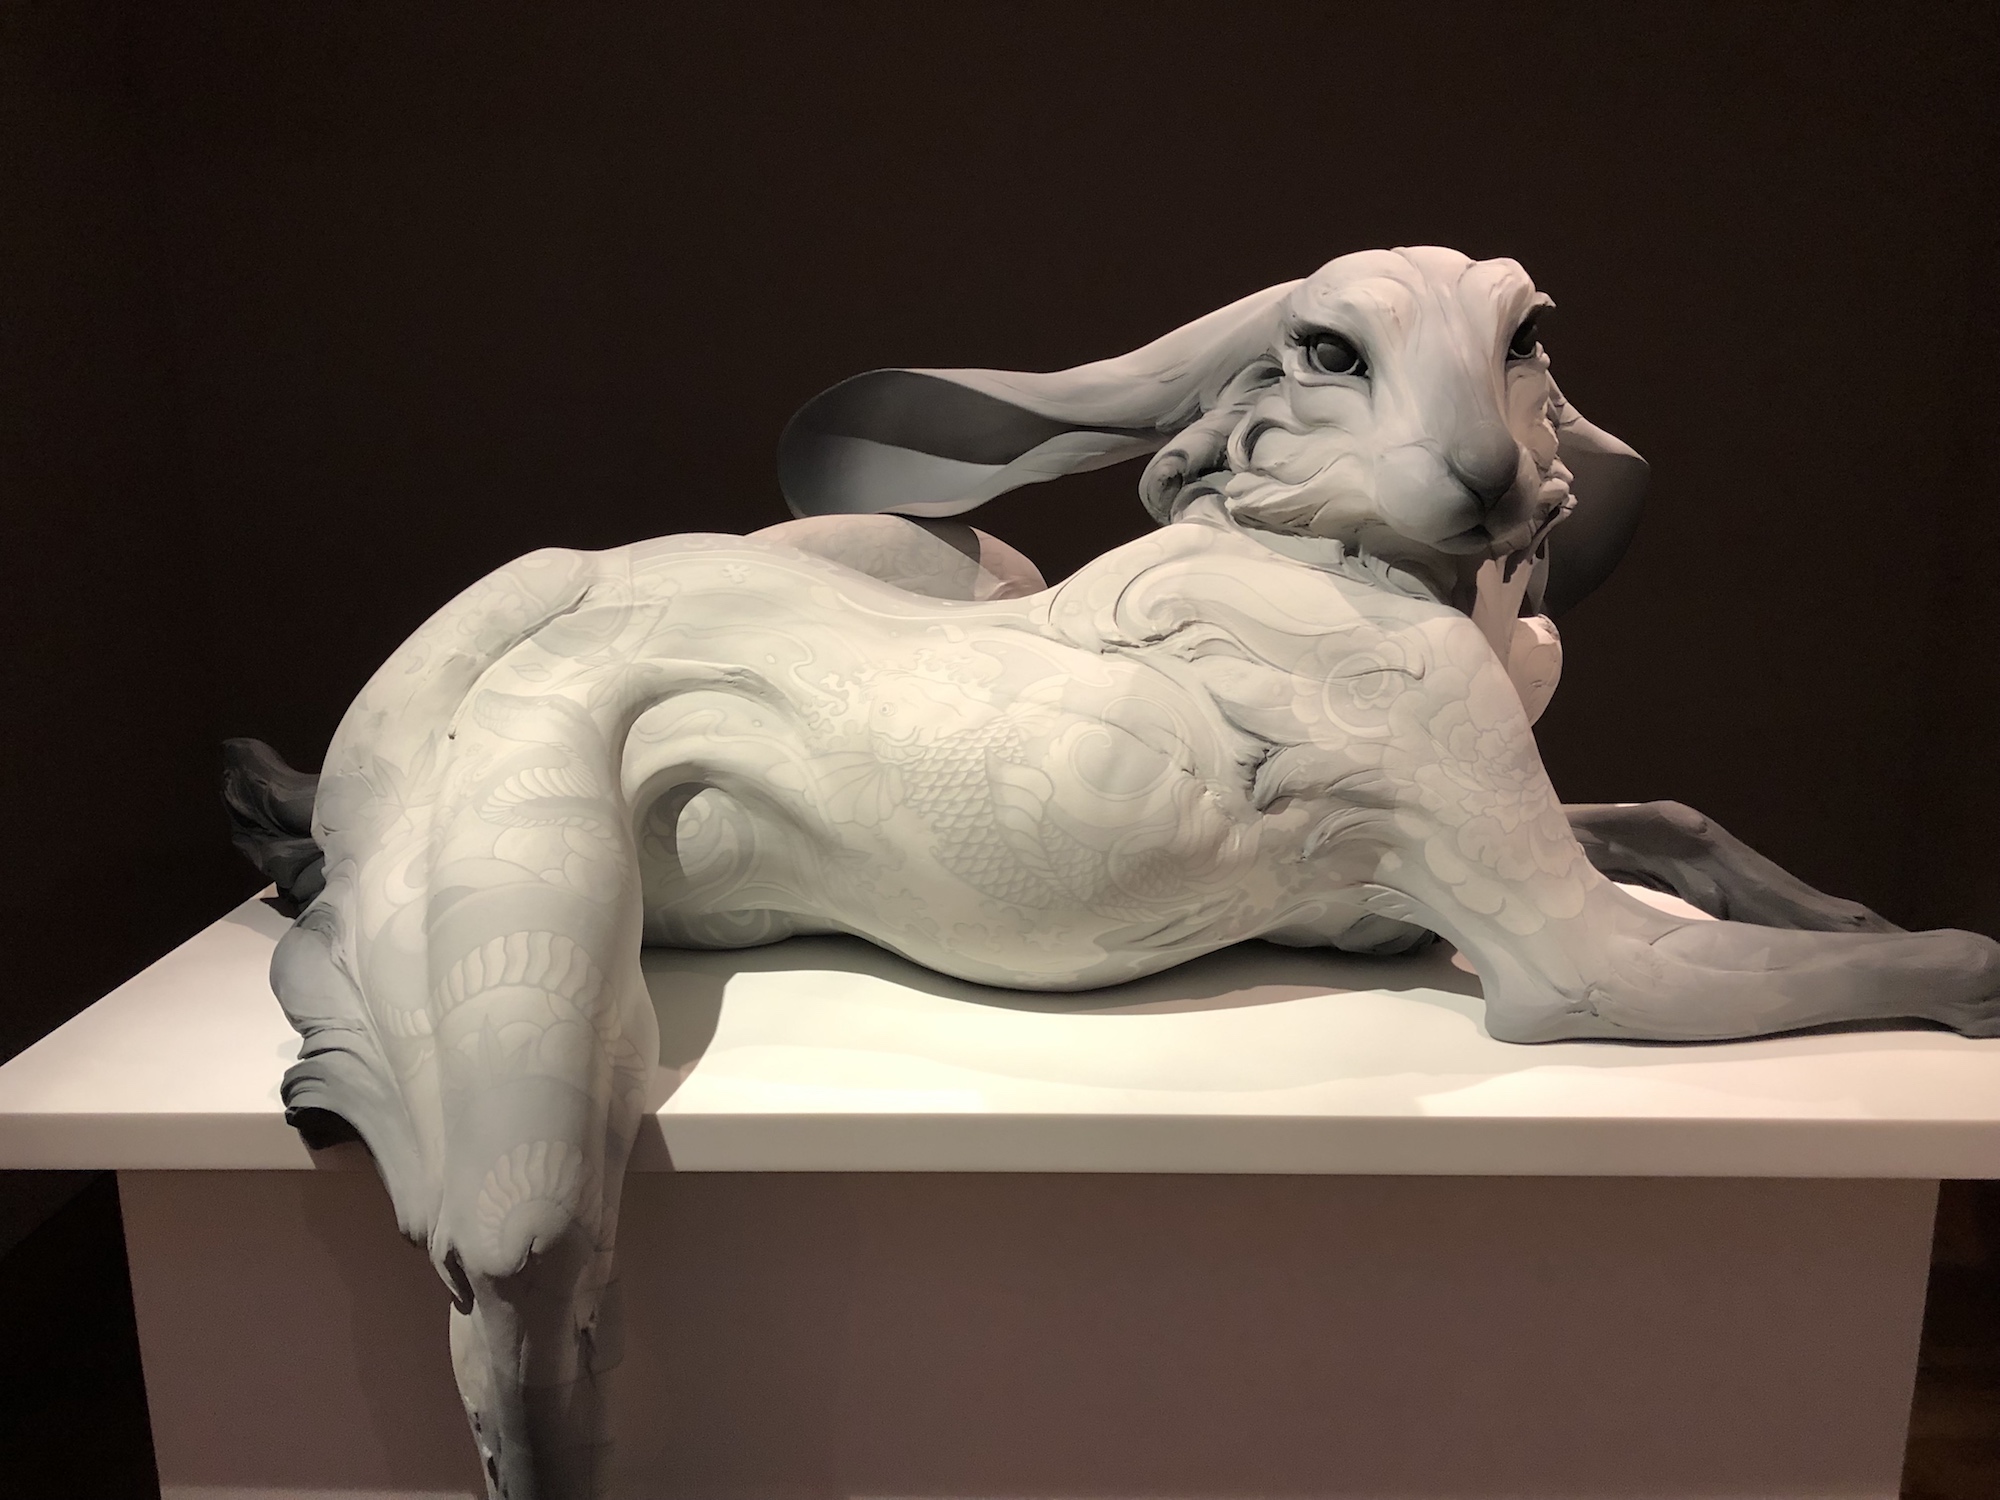 L'Amante by Beth Cavener at the Chazen Museum of Art in Madison Wisconsin.